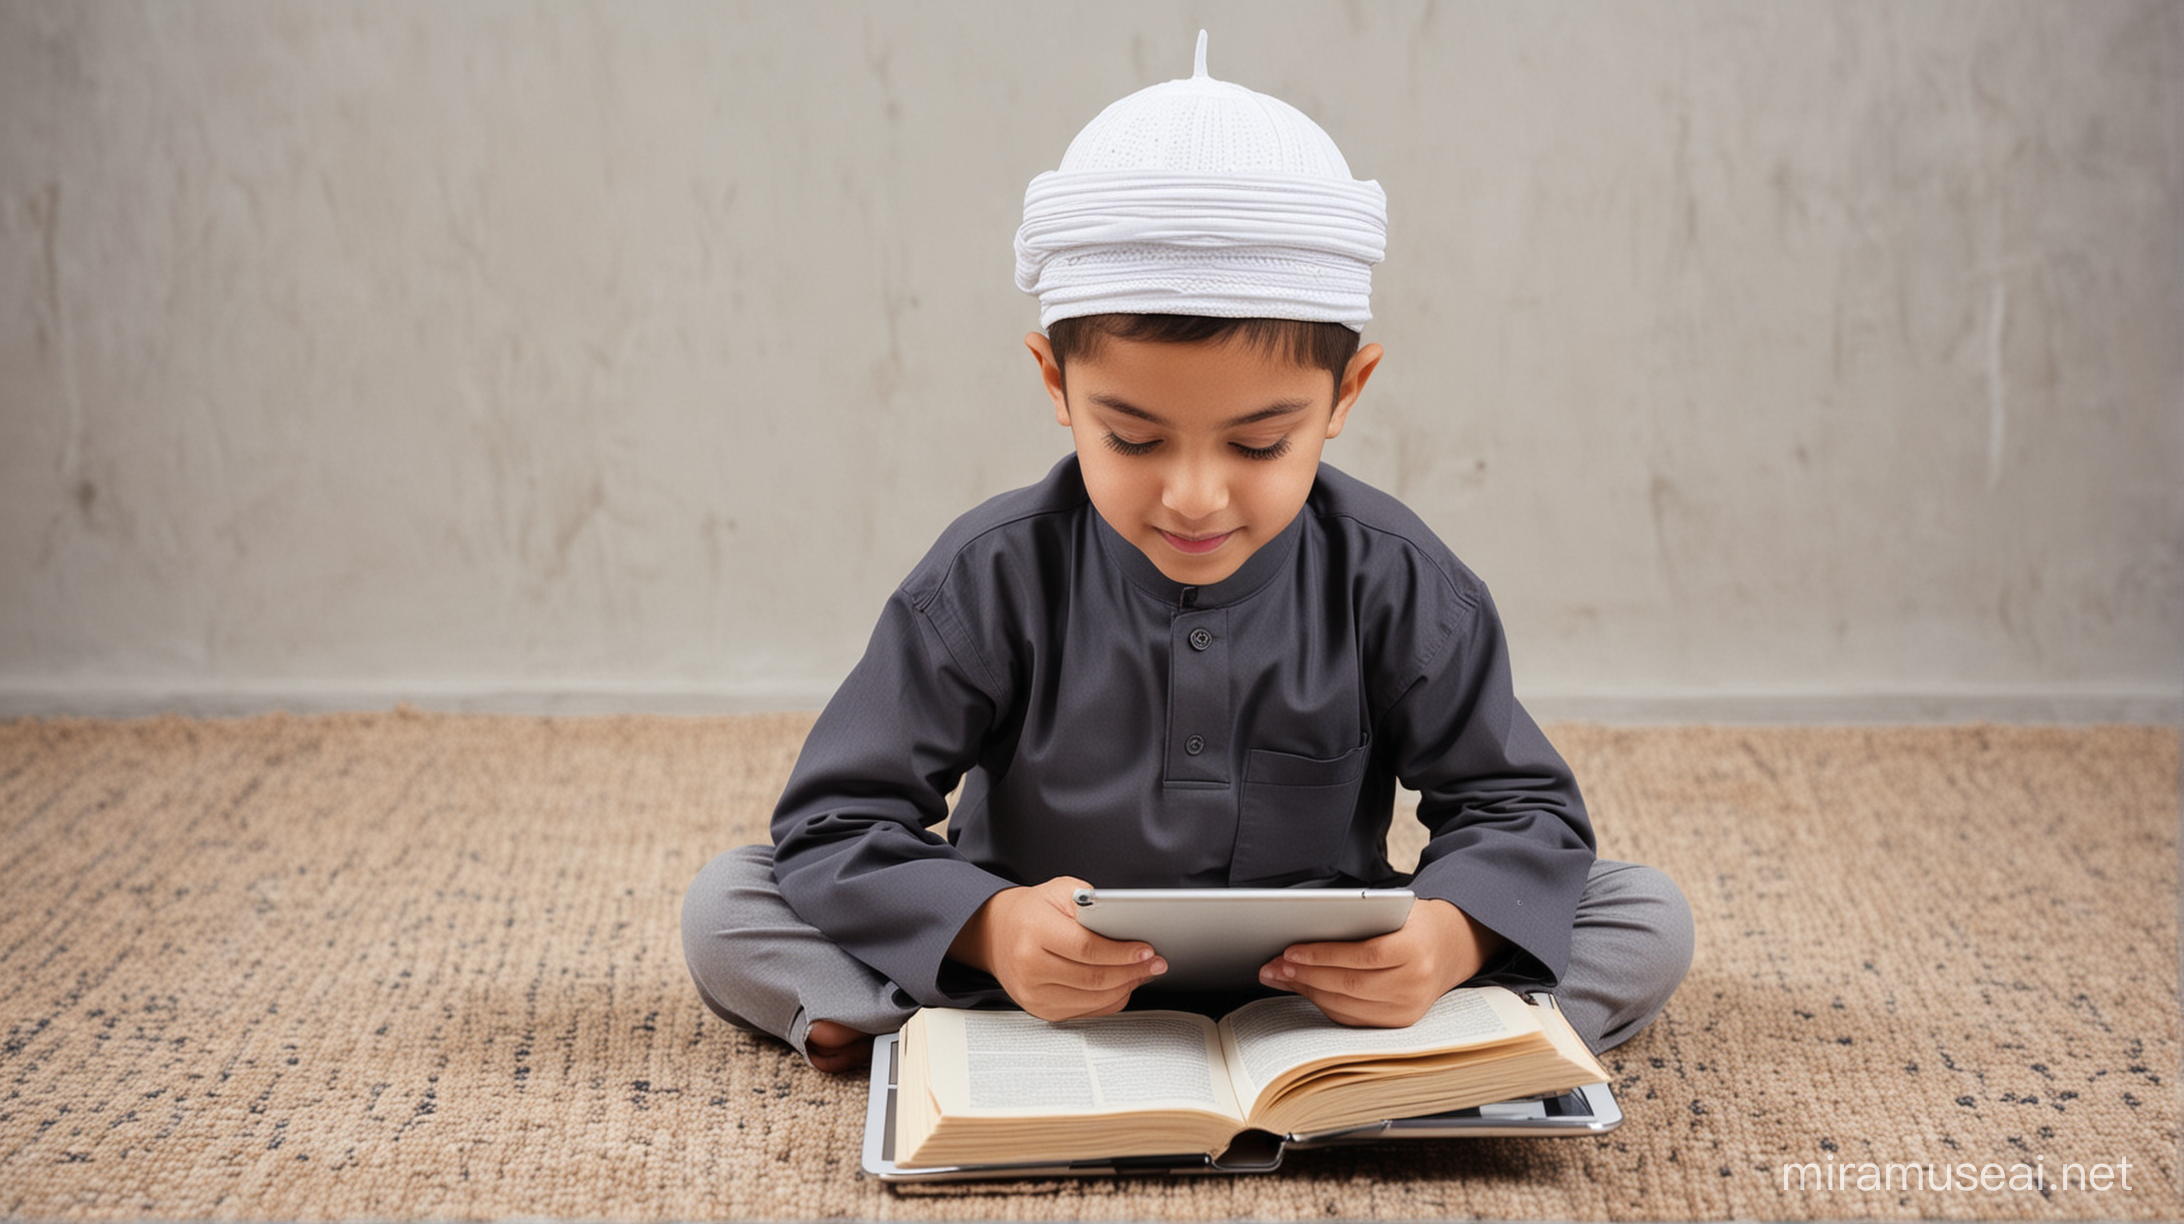 Engaged Muslim Child Learning Quran Online with Tablet